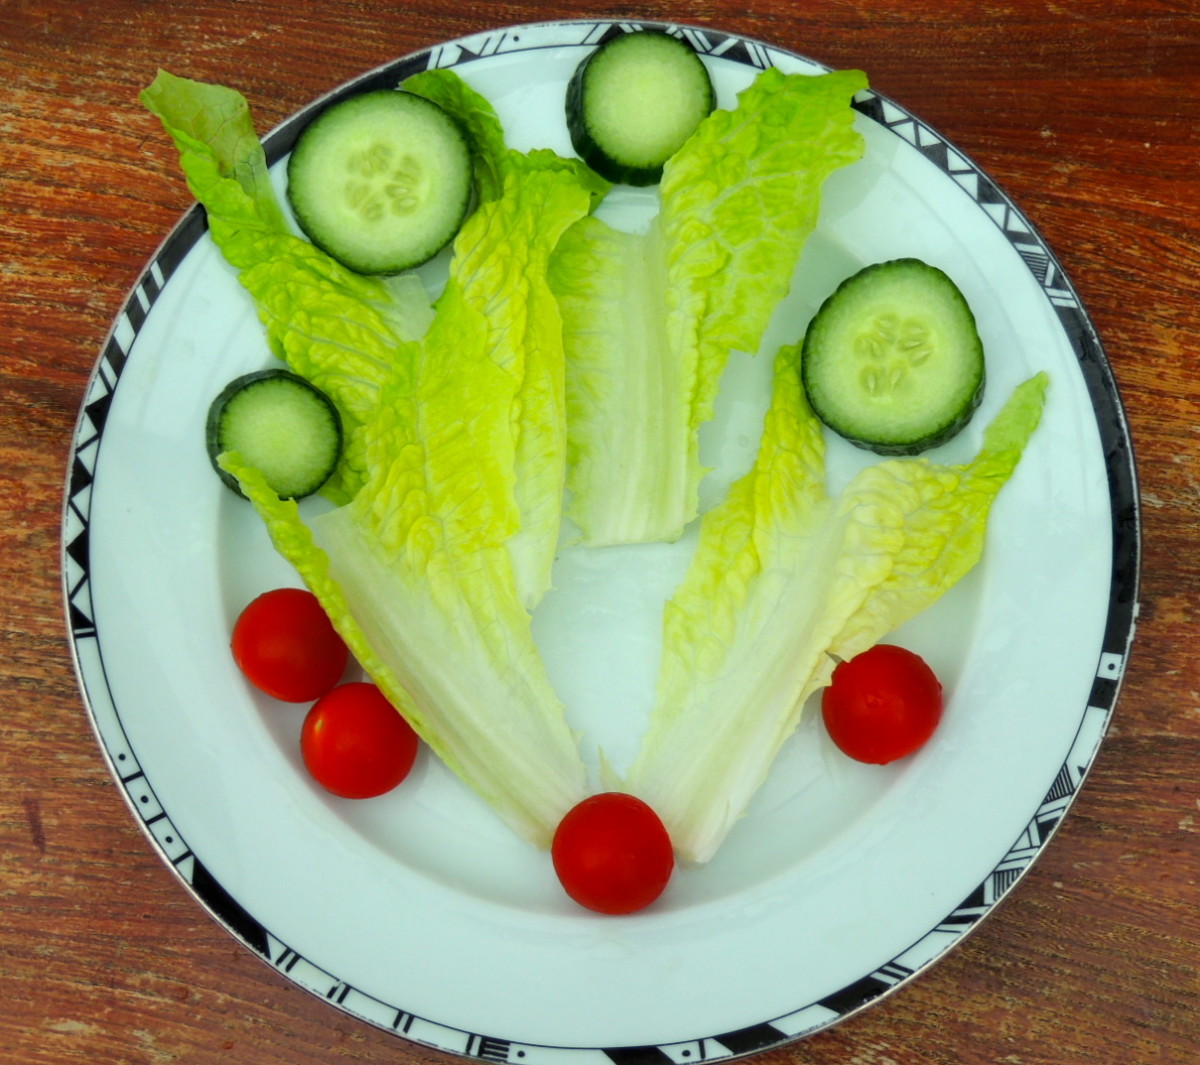 Lettuce angels with cucumber halos!